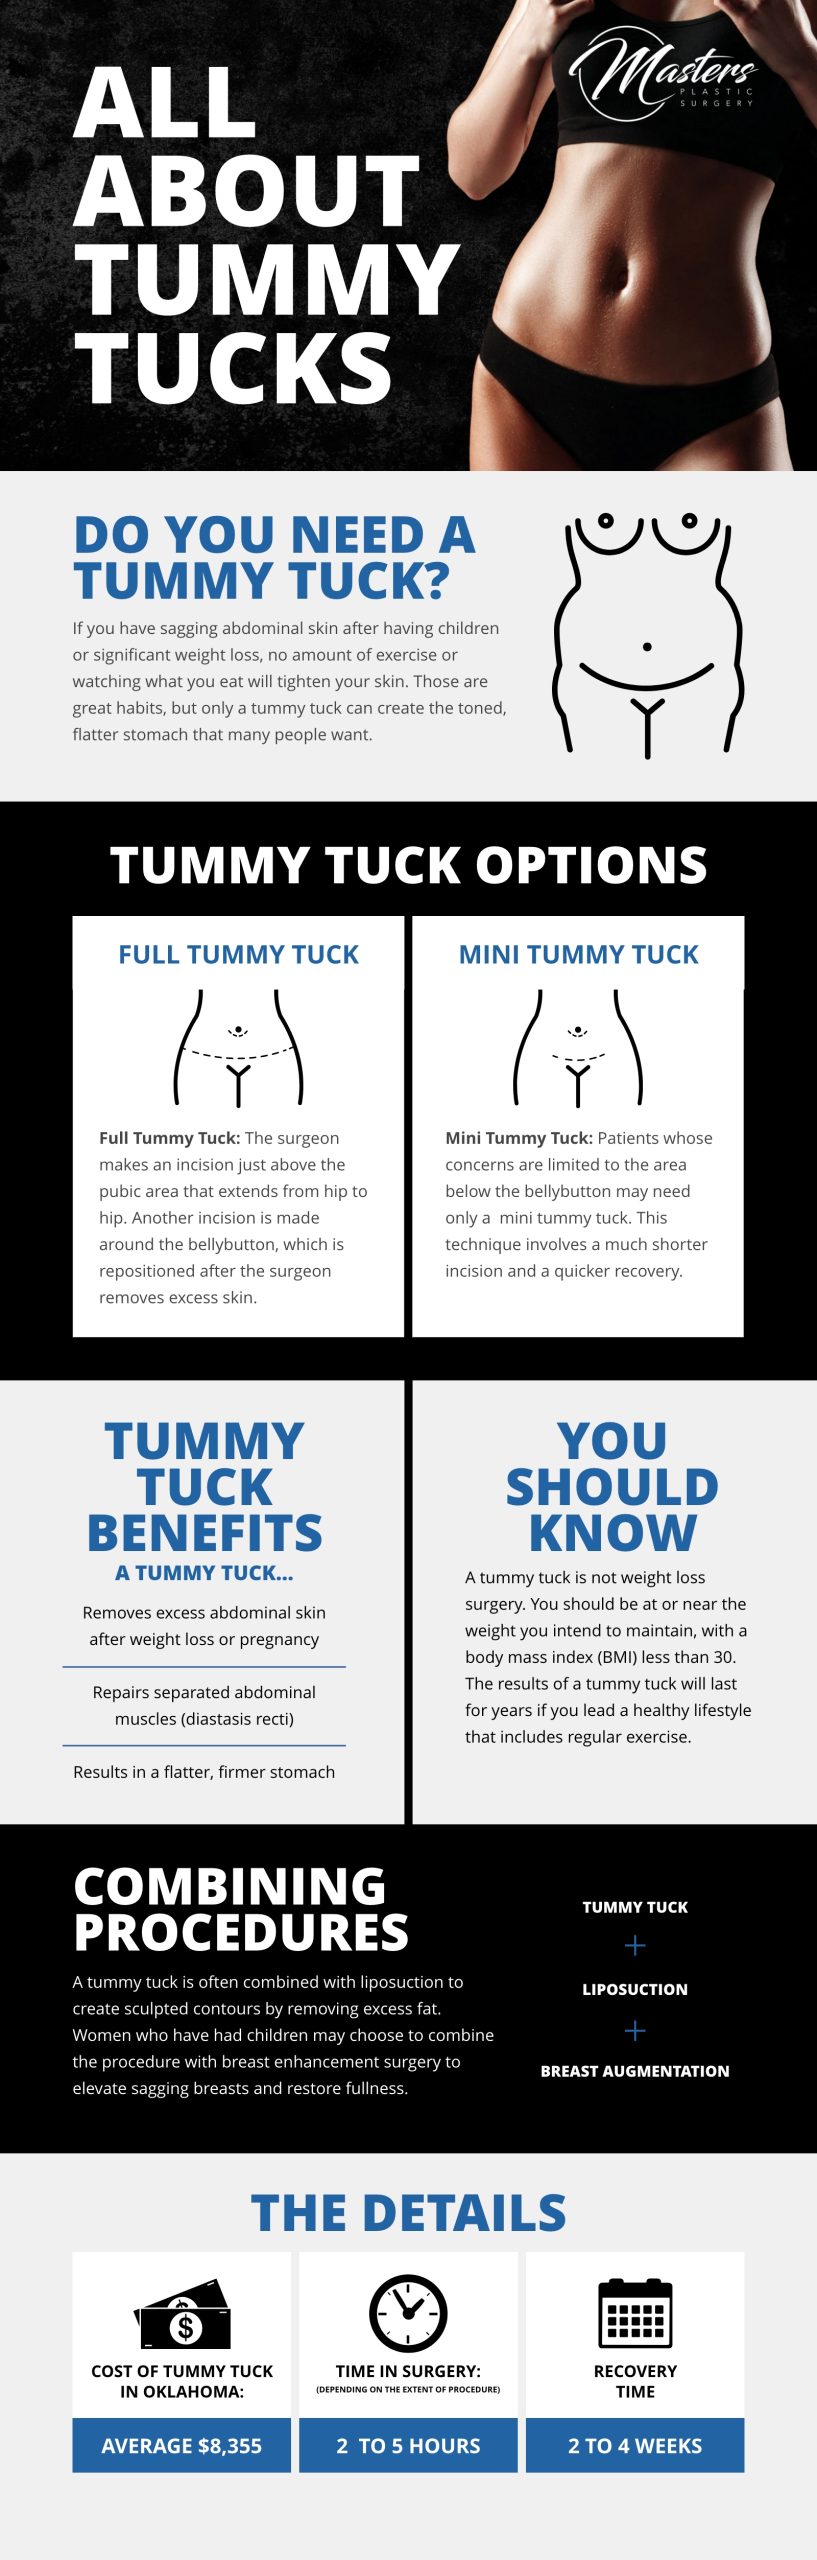 All about tummy tucks infographic.